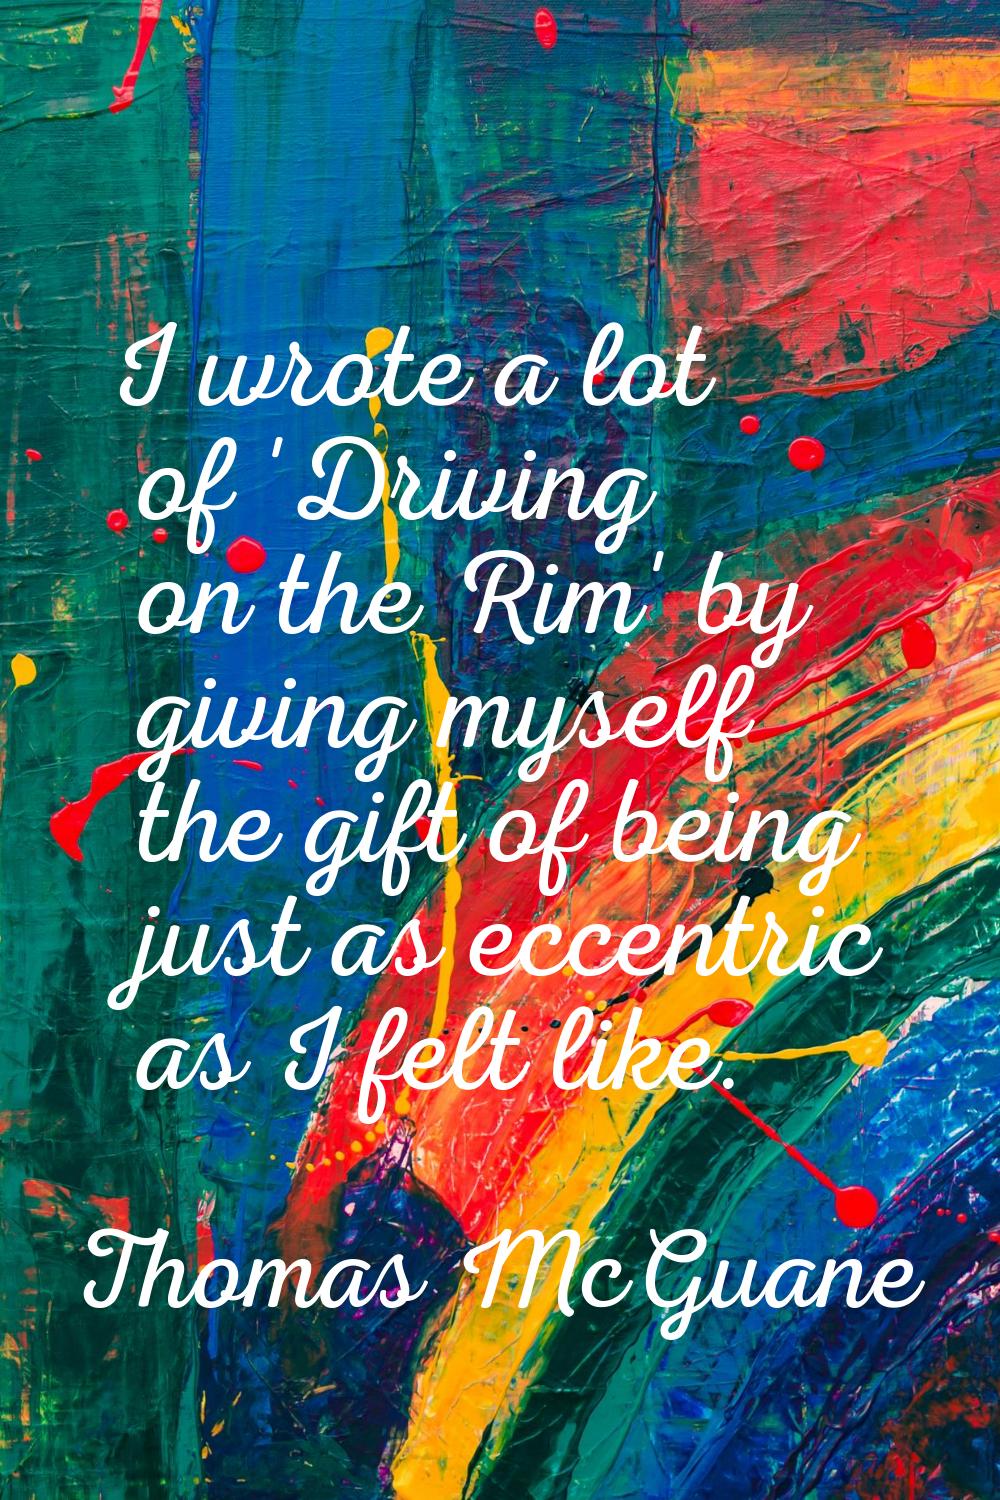 I wrote a lot of 'Driving on the Rim' by giving myself the gift of being just as eccentric as I fel